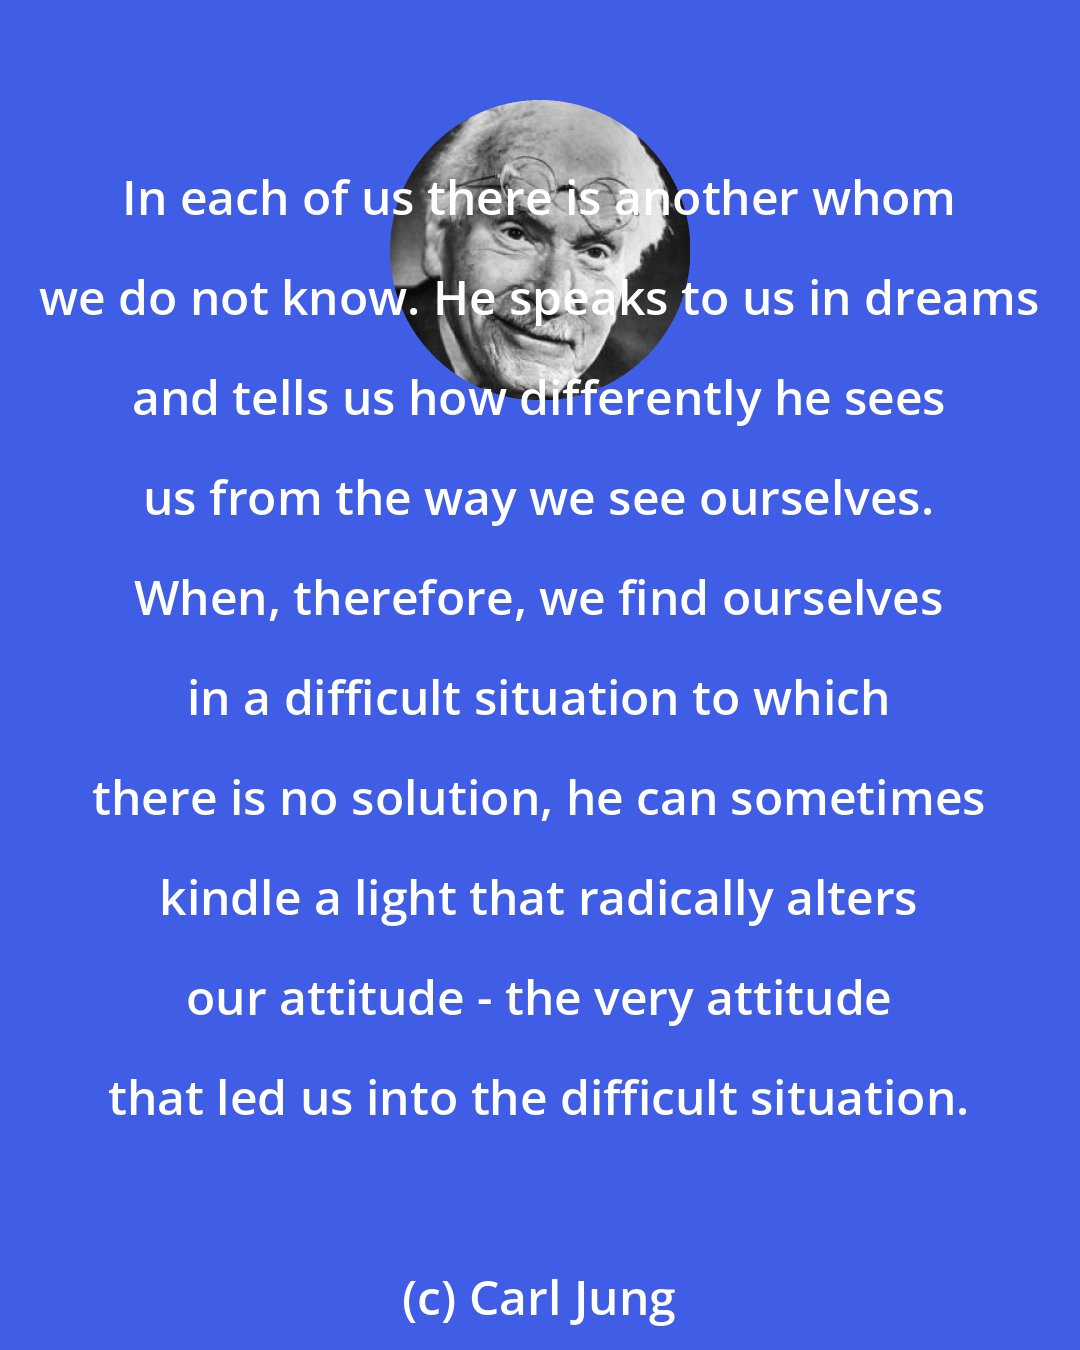 Carl Jung: In each of us there is another whom we do not know. He speaks to us in dreams and tells us how differently he sees us from the way we see ourselves. When, therefore, we find ourselves in a difficult situation to which there is no solution, he can sometimes kindle a light that radically alters our attitude - the very attitude that led us into the difficult situation.